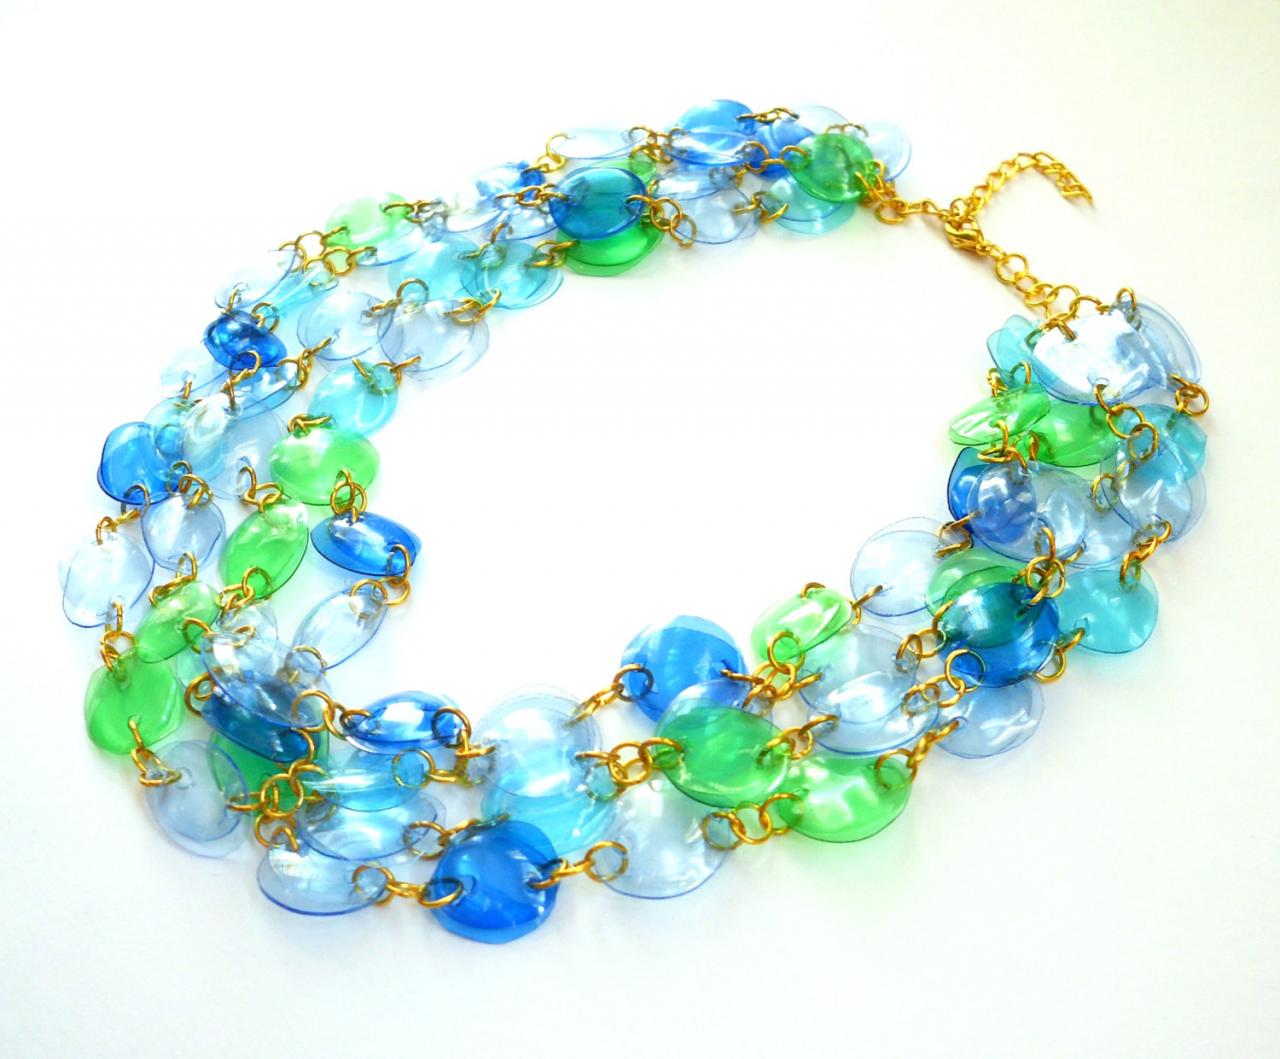 Statement Necklace Handmade Of Recycled Plastic Bottles In Blue & Green, Upcycled Jewelry, Colorful Designer Necklace, Eco Friendly